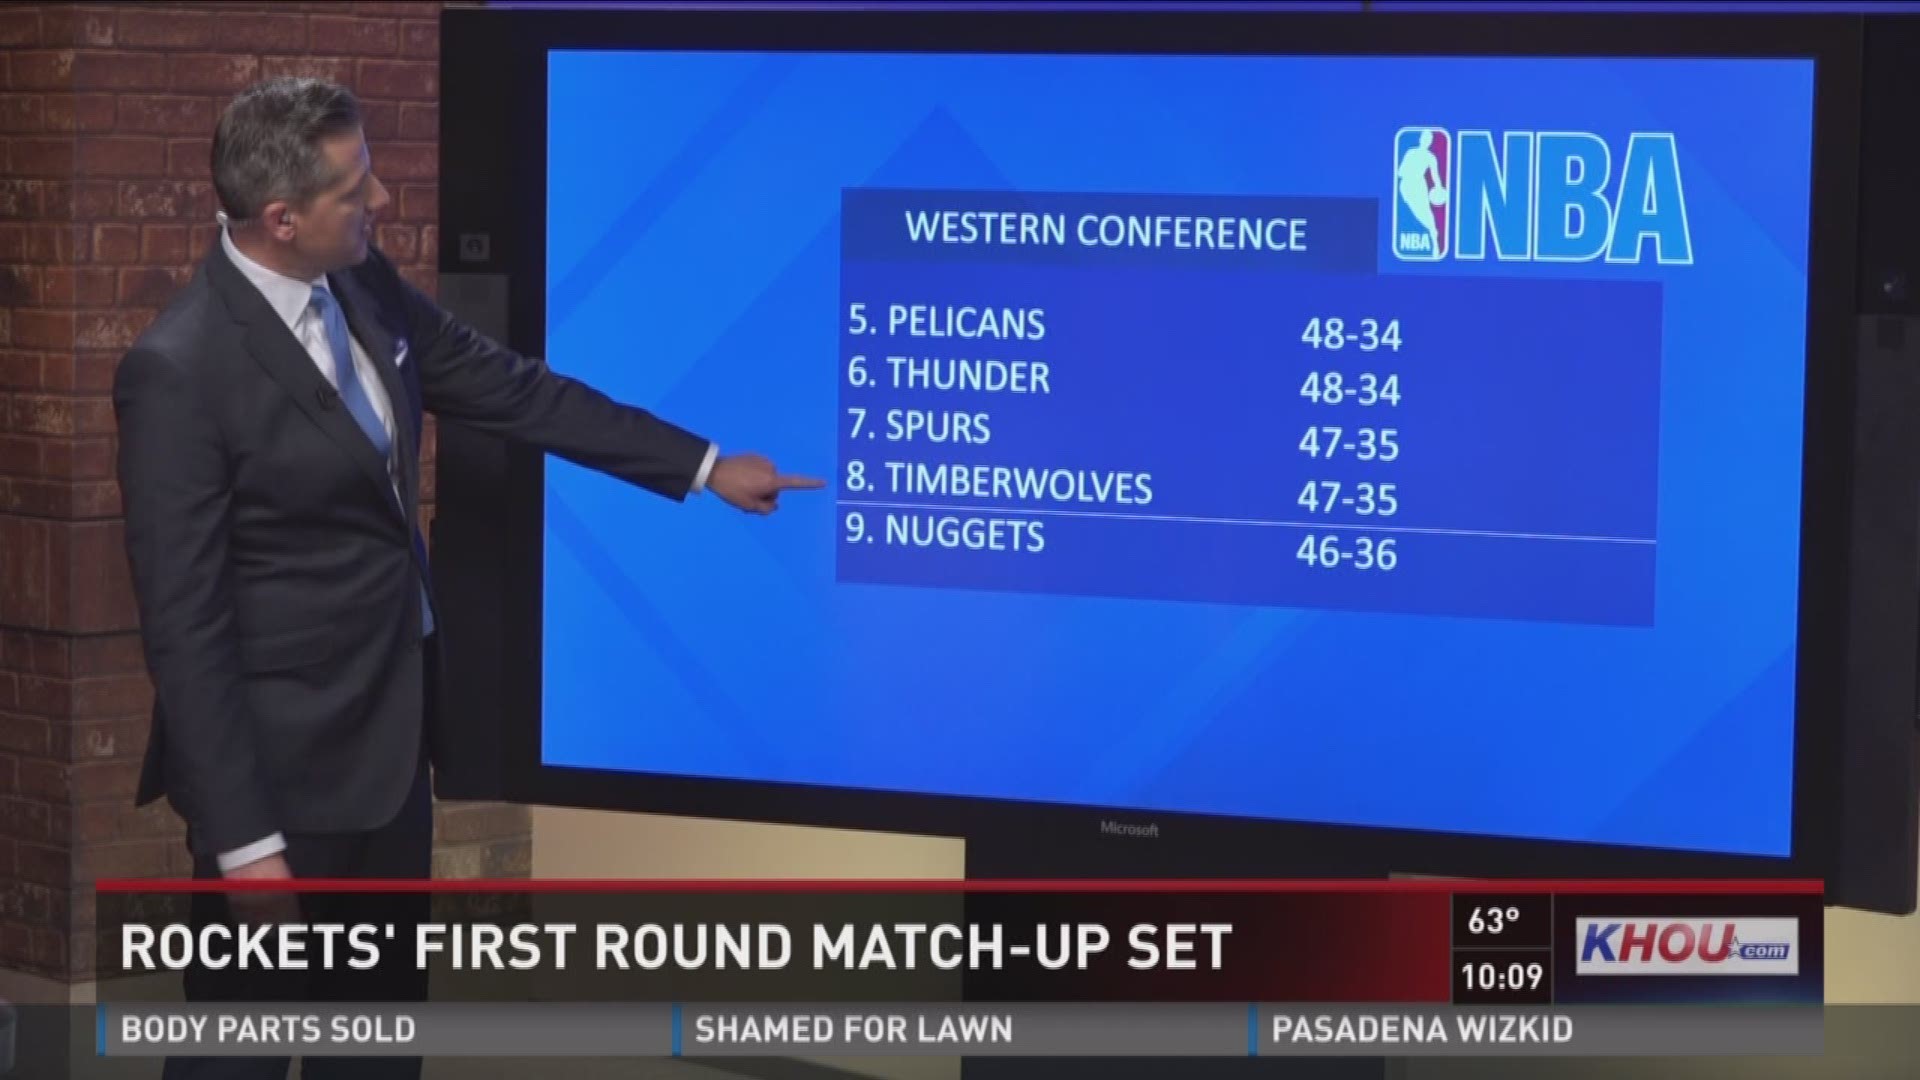 The Houston Rockets' first-round matchup is set against the Minnesota Timberwolves.